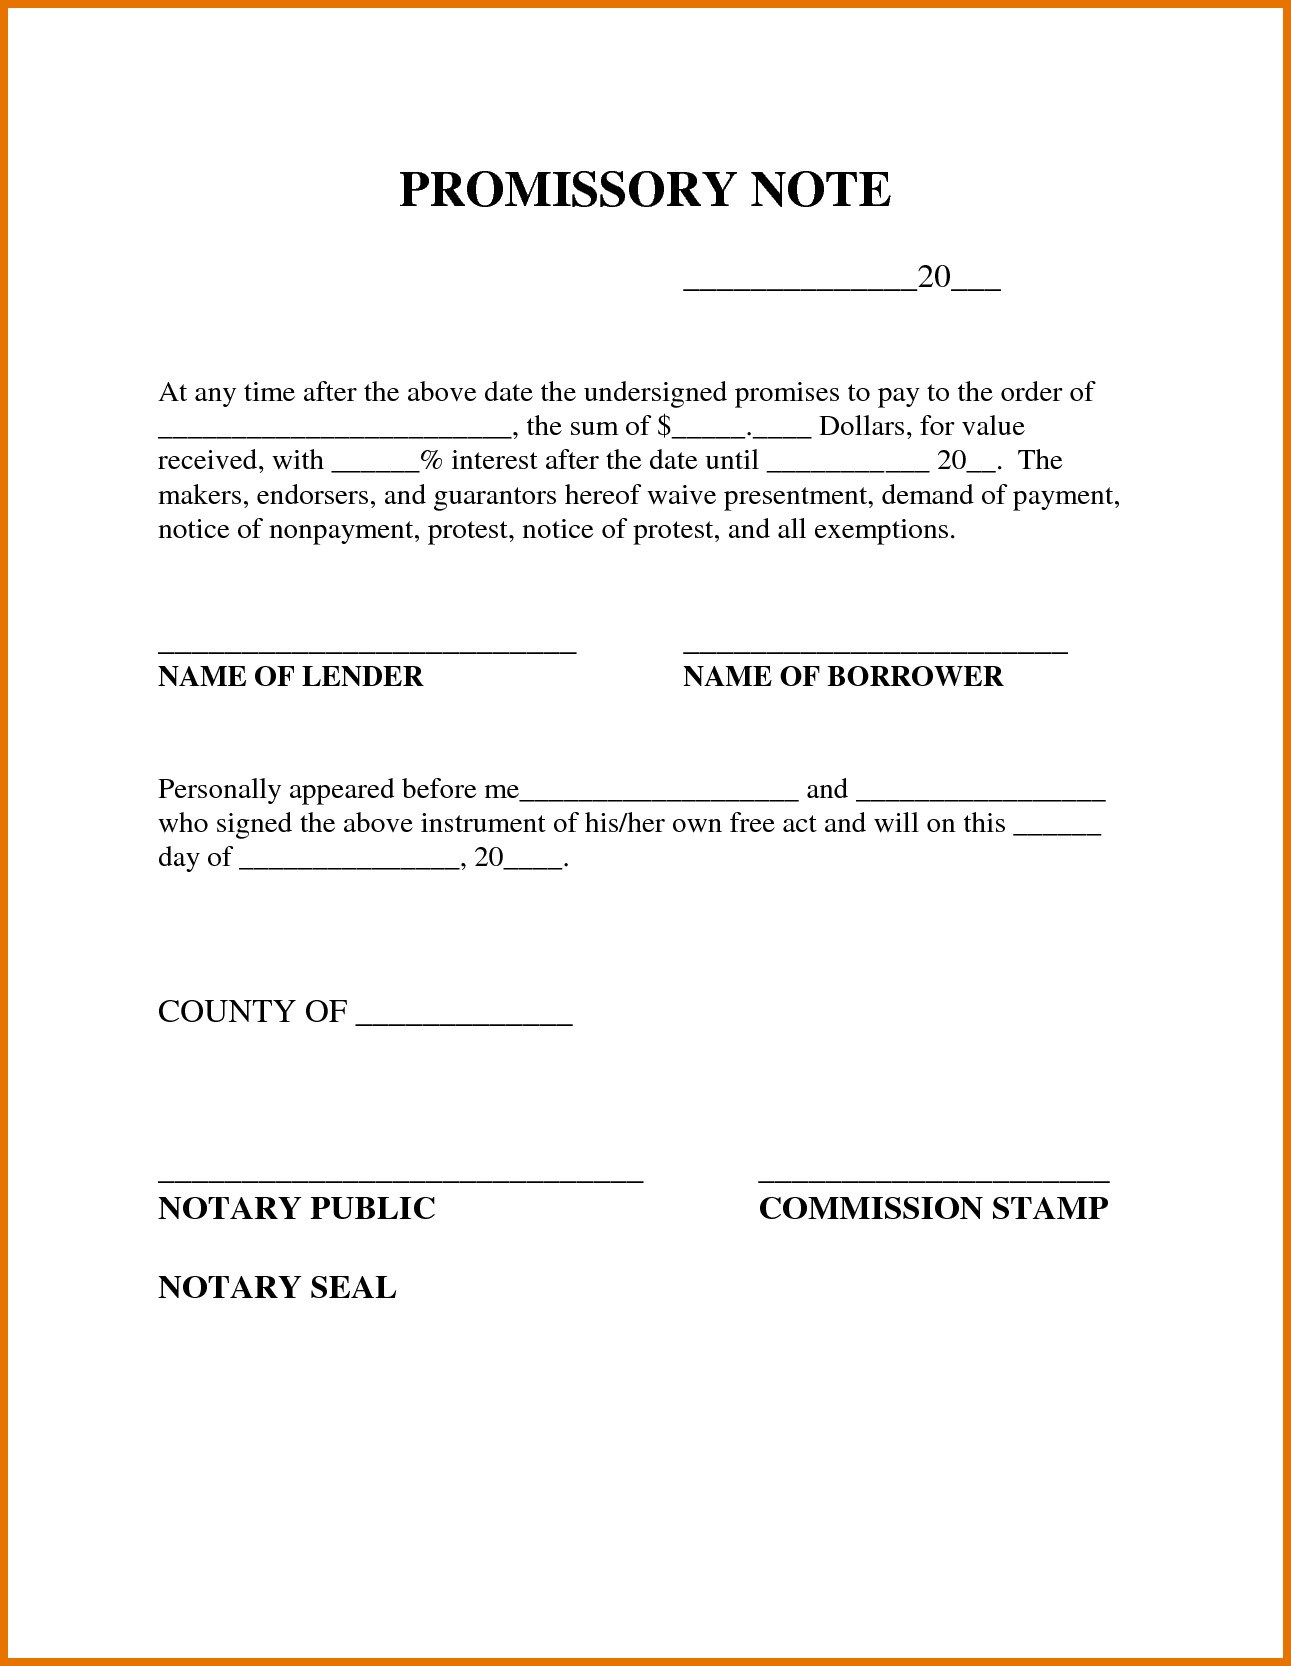 Free Printable Promissory Note Template : Violeet - Free Printable Promissory Note Template